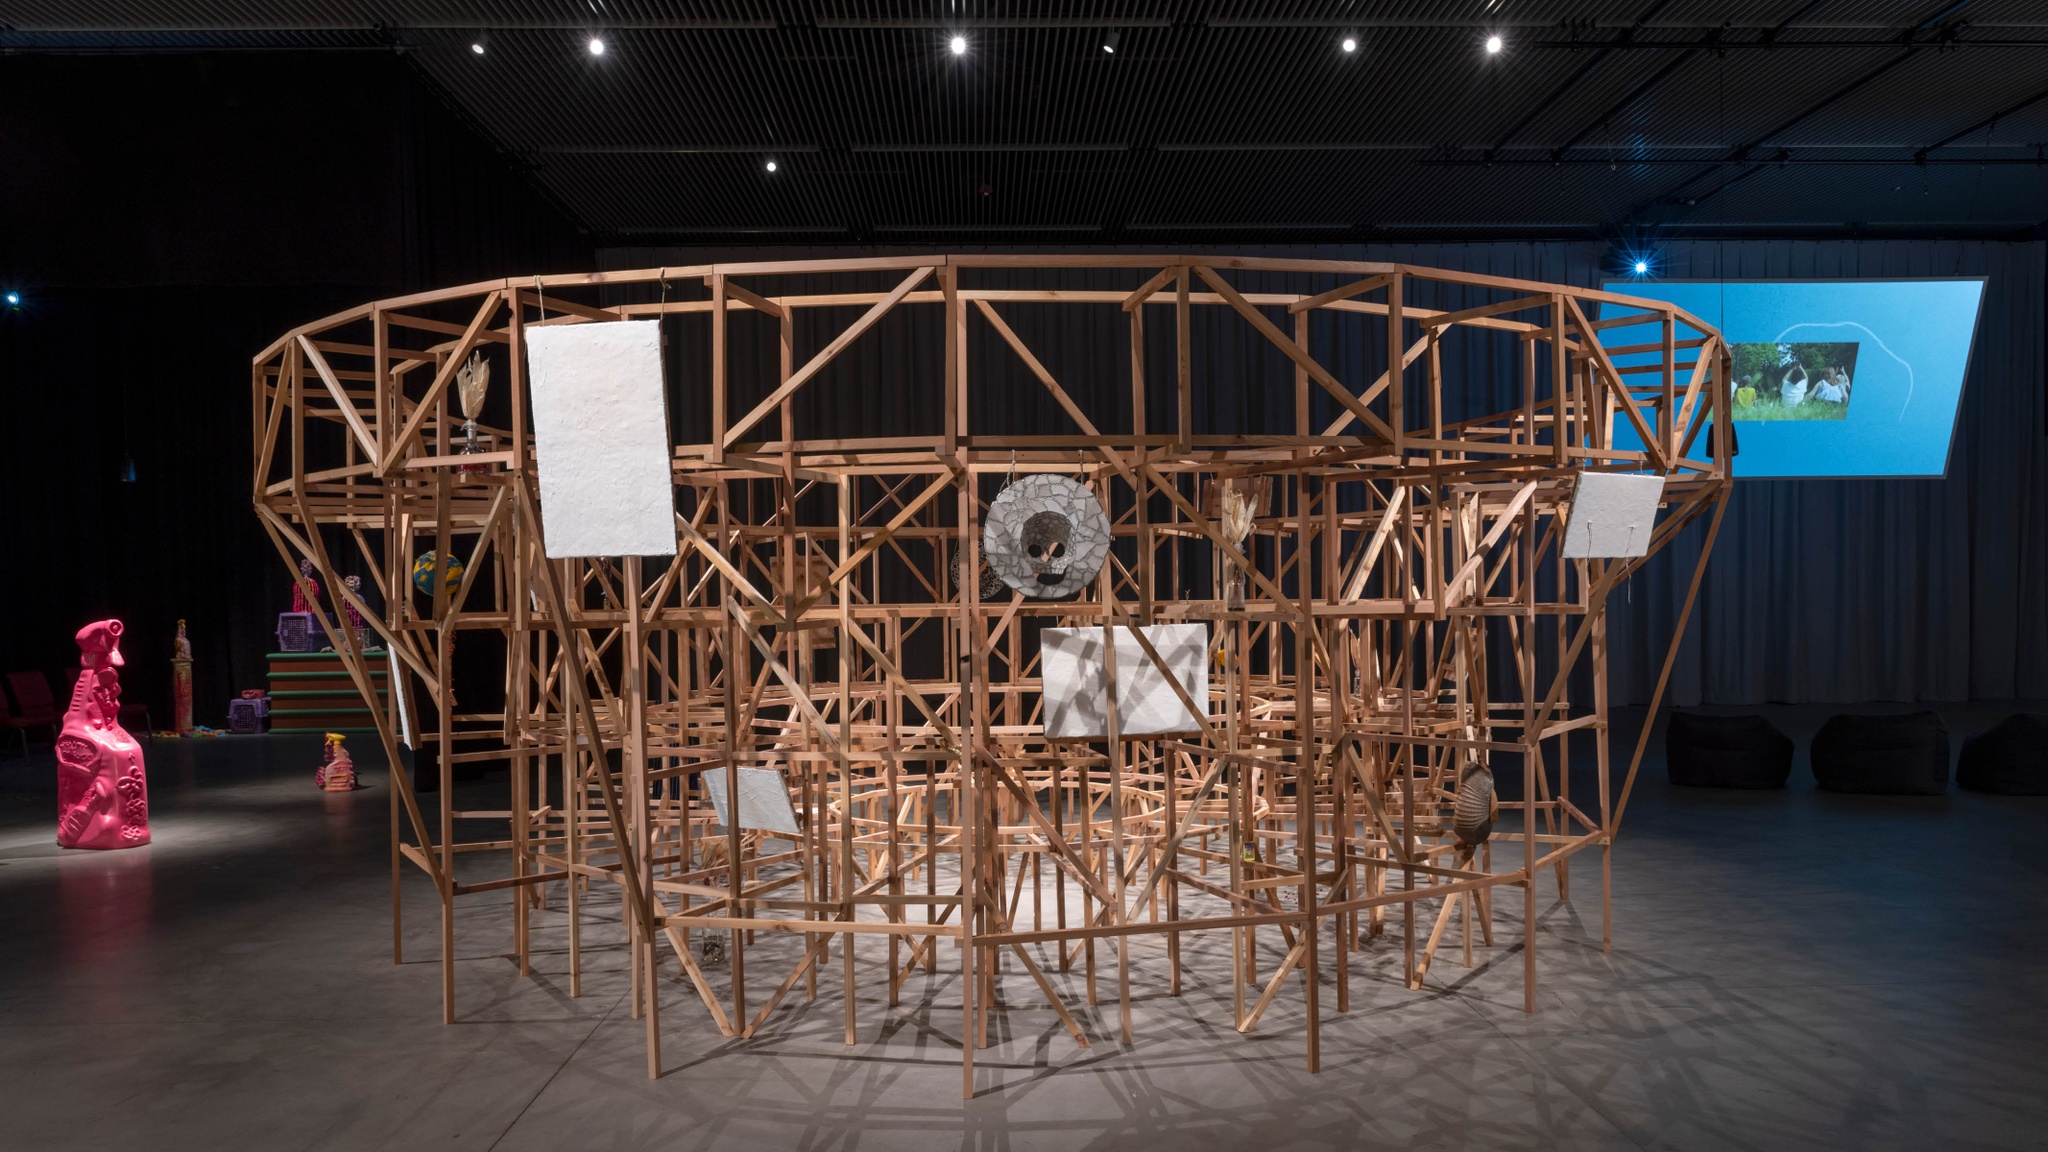 A wooden sculptural installation in a gallery with low lighting. The circular structure, about 6 feet high, is a scaled down model of the architectural support for arena seating. It is made of thin beams of wood and has objects like masks and paintings hanging from it facing outward. The center of the arena is empty and inaccessible to gallery visitors. 